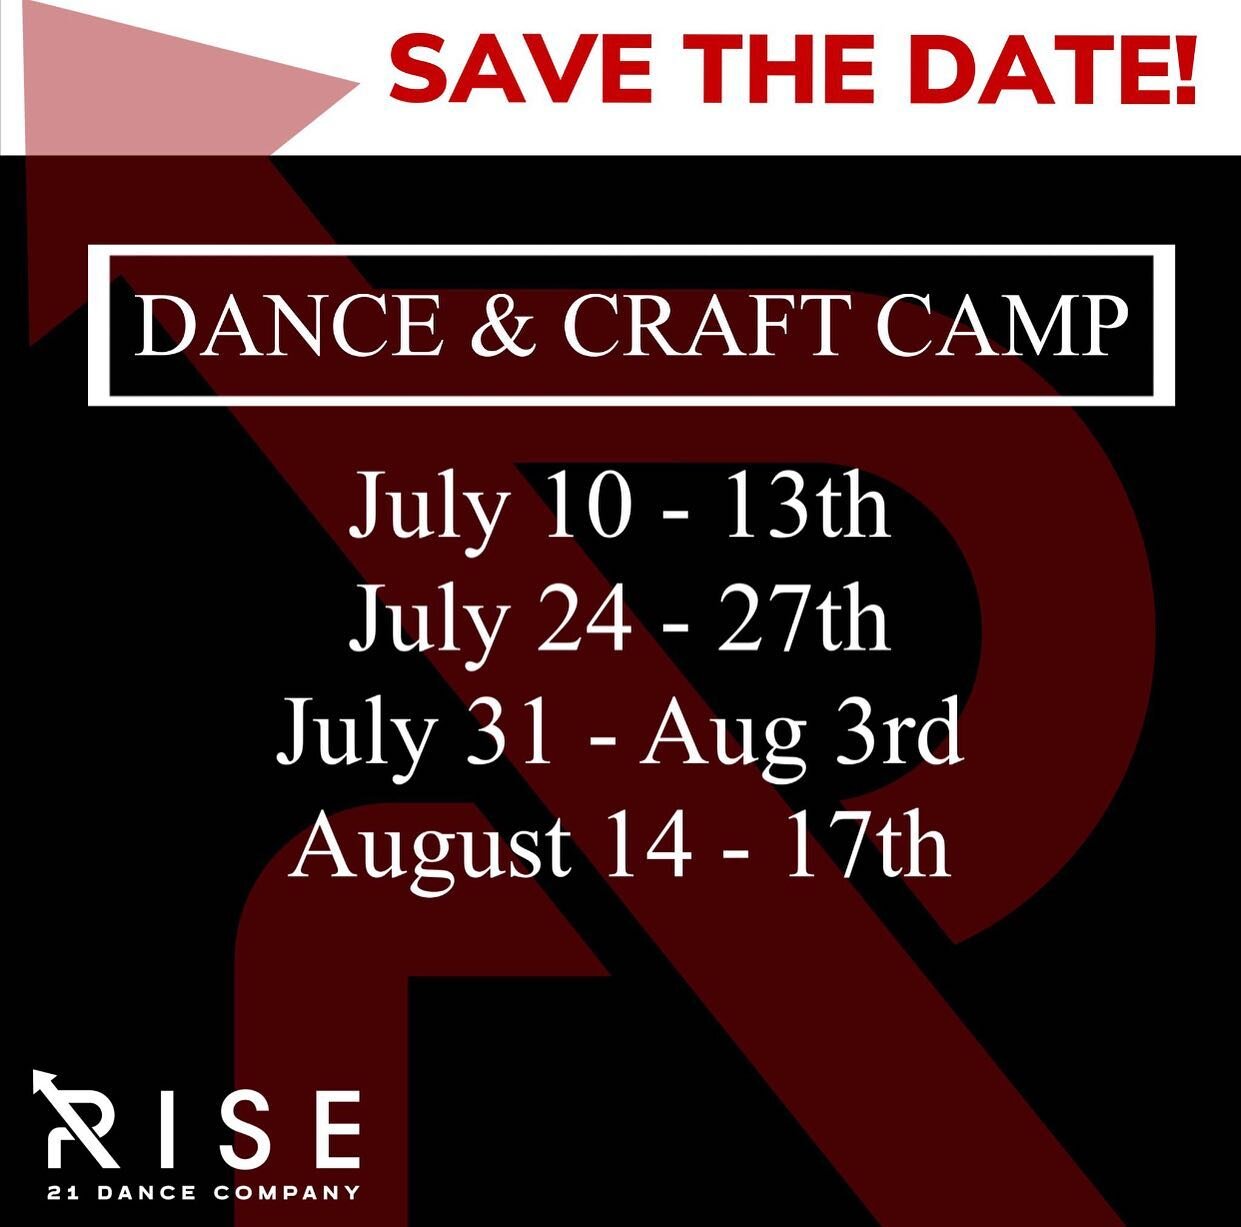 Save the date ! Our popular Dance and Craft camps are back !!!! These camps are geared to our recreational and younger dancers. More info and links to register, coming soon. #jazz #hiphop #tap #ballet #musicaltheatre #crafts #gametime #summercare #be